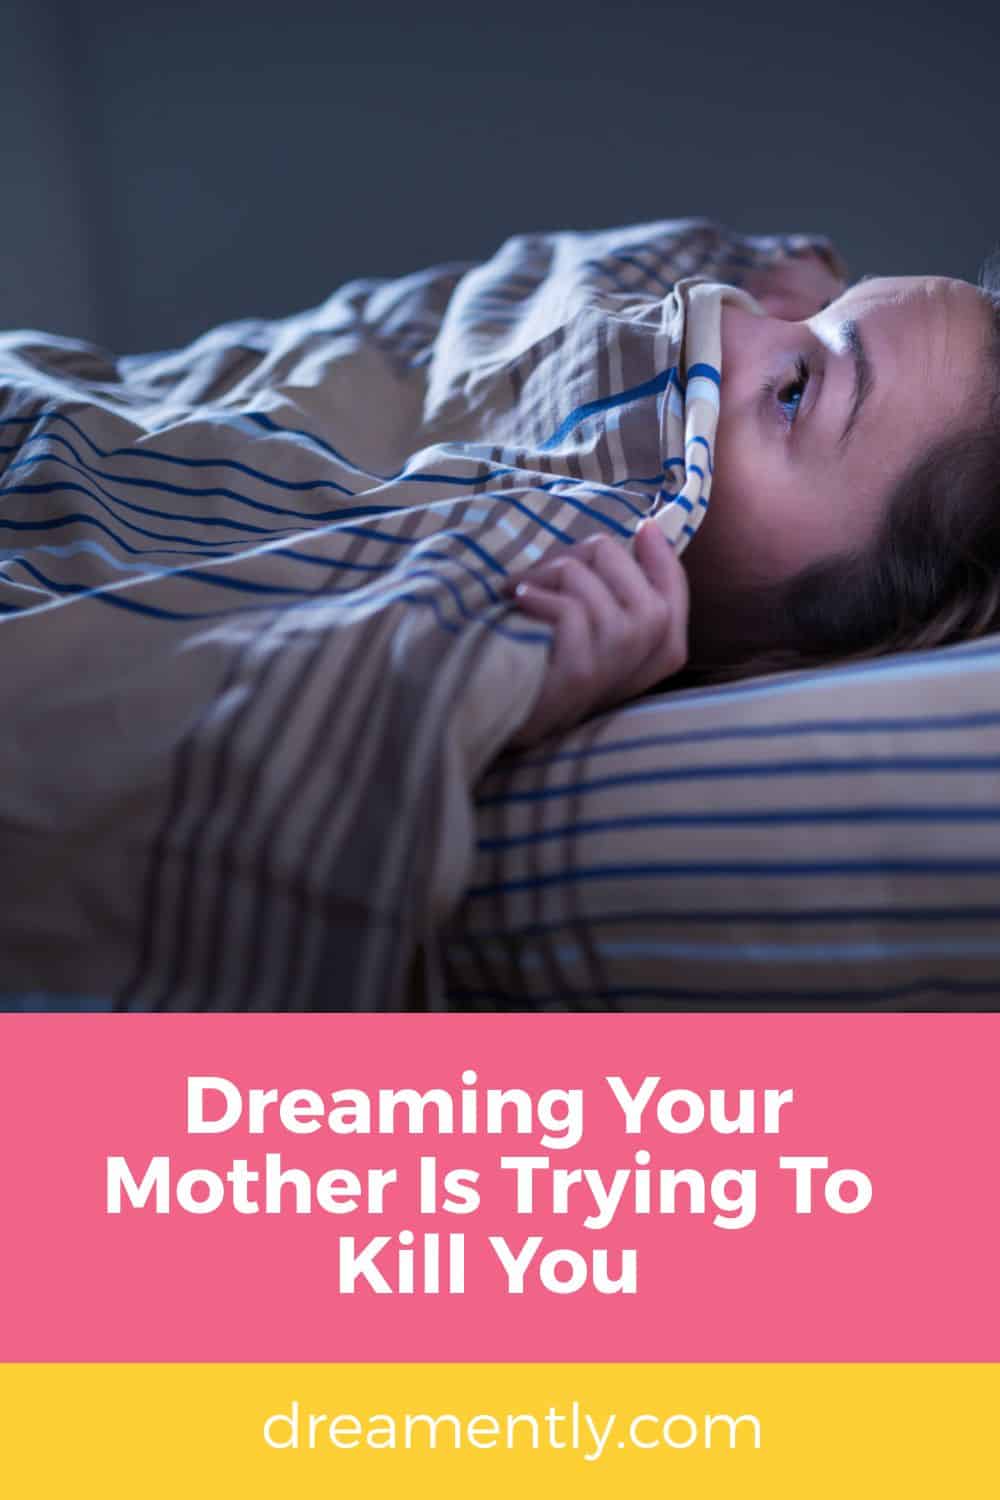 Dreaming Your Mother Is Trying To Kill You